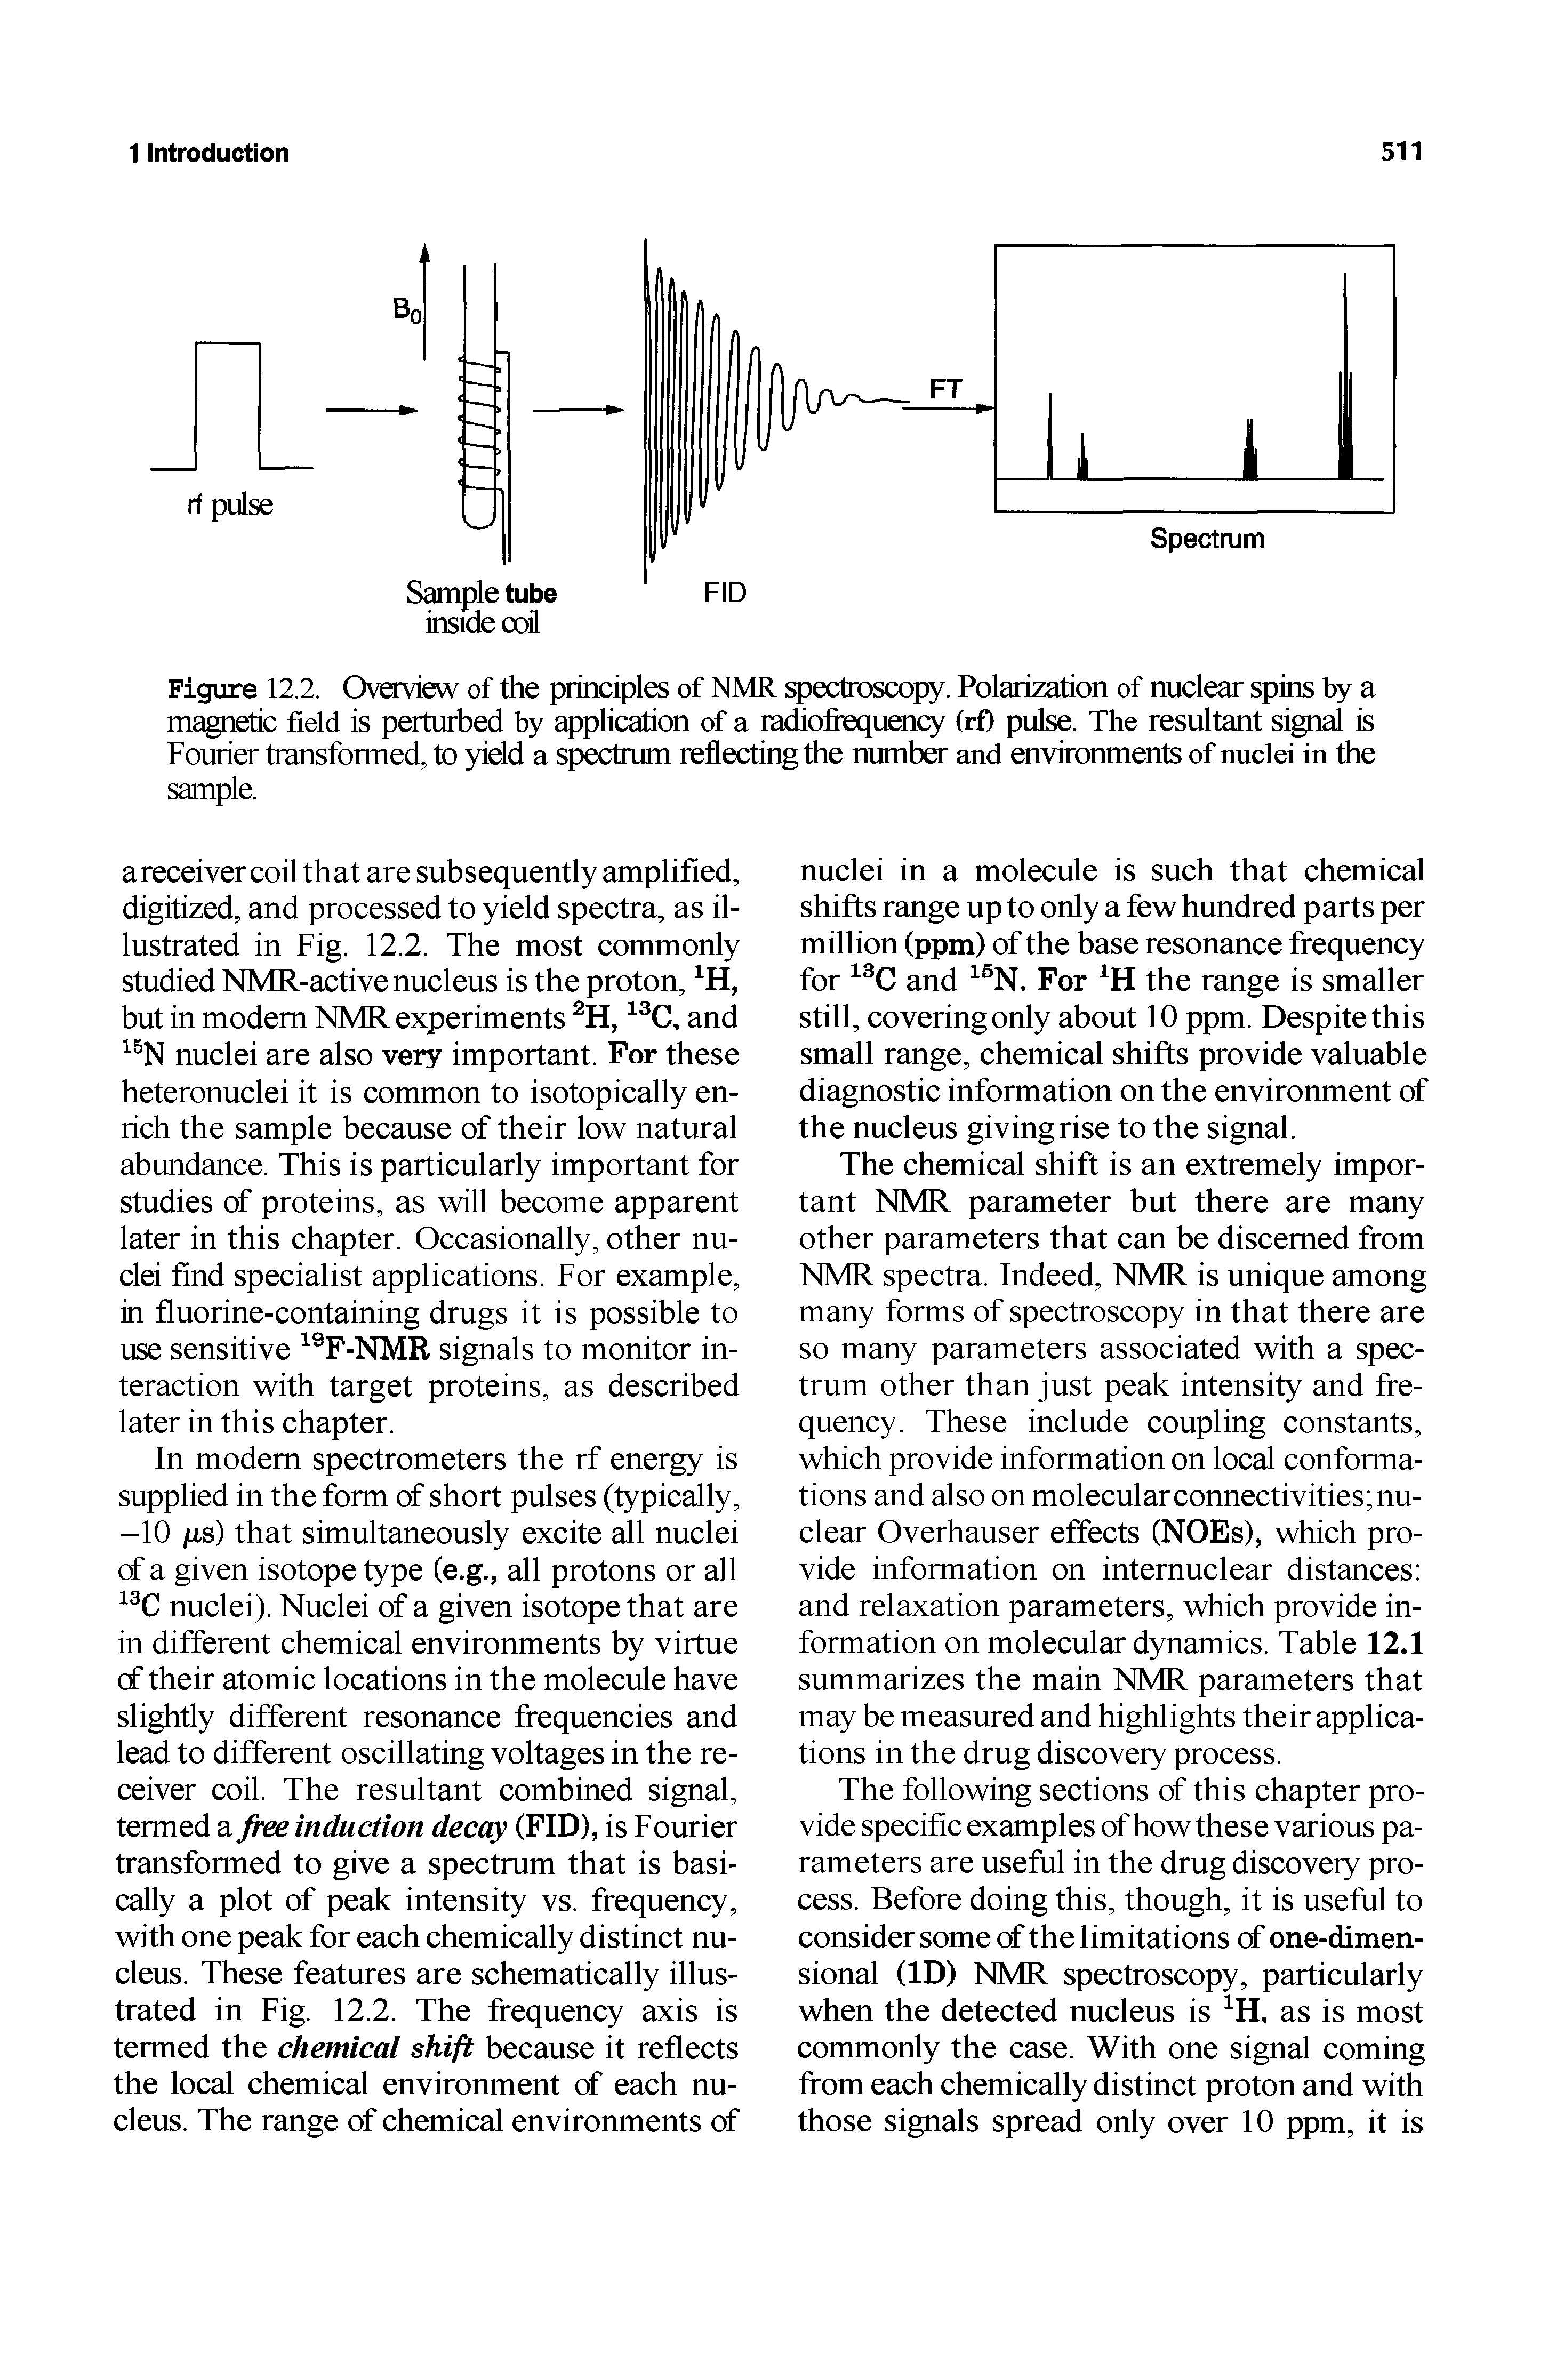 Figure 12.2. OvQview of the principles of NMR spectroscopy. Polarization of nuclear spins by a magnetic field is perturbed by plication of a radiofiequency (rt) pulse. The resultant signal is Fourier transformed, to yield a spectrum reflecting the numbCT and environments of nuclei in the sample.